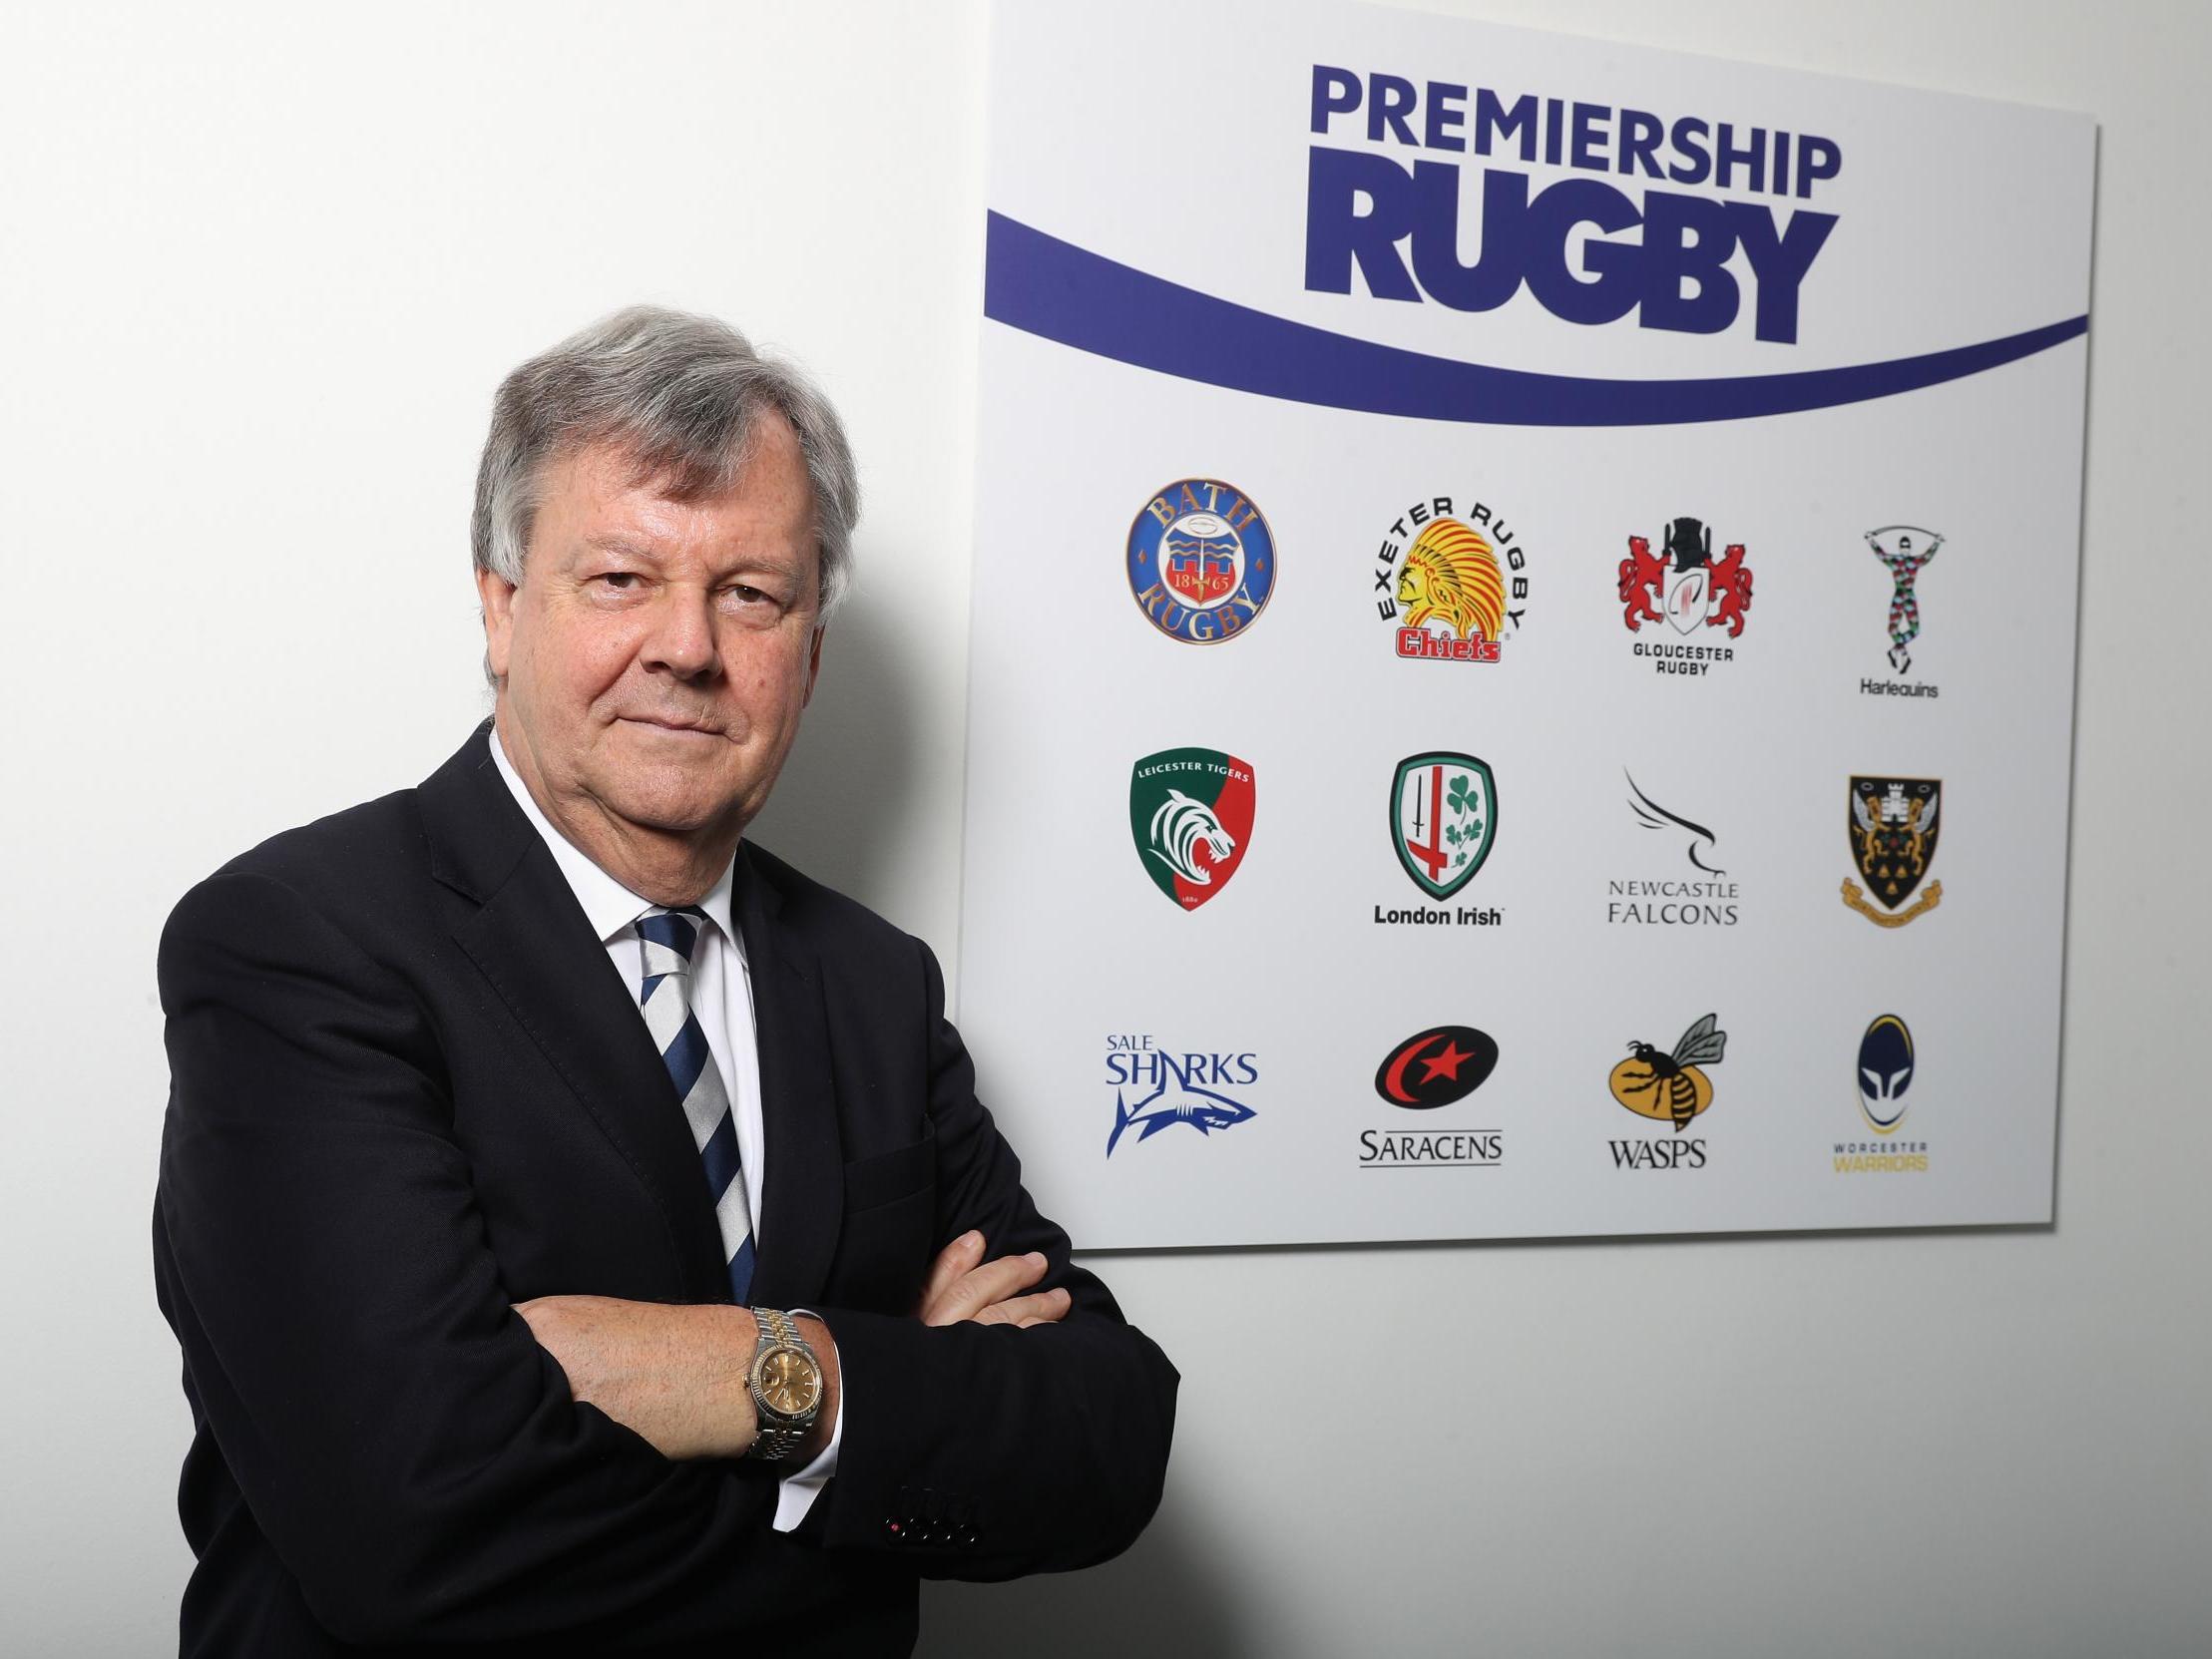 Premiership Rugby chairman Ian Ritchie confirmed CVC Capital Partners' offer had been rejected